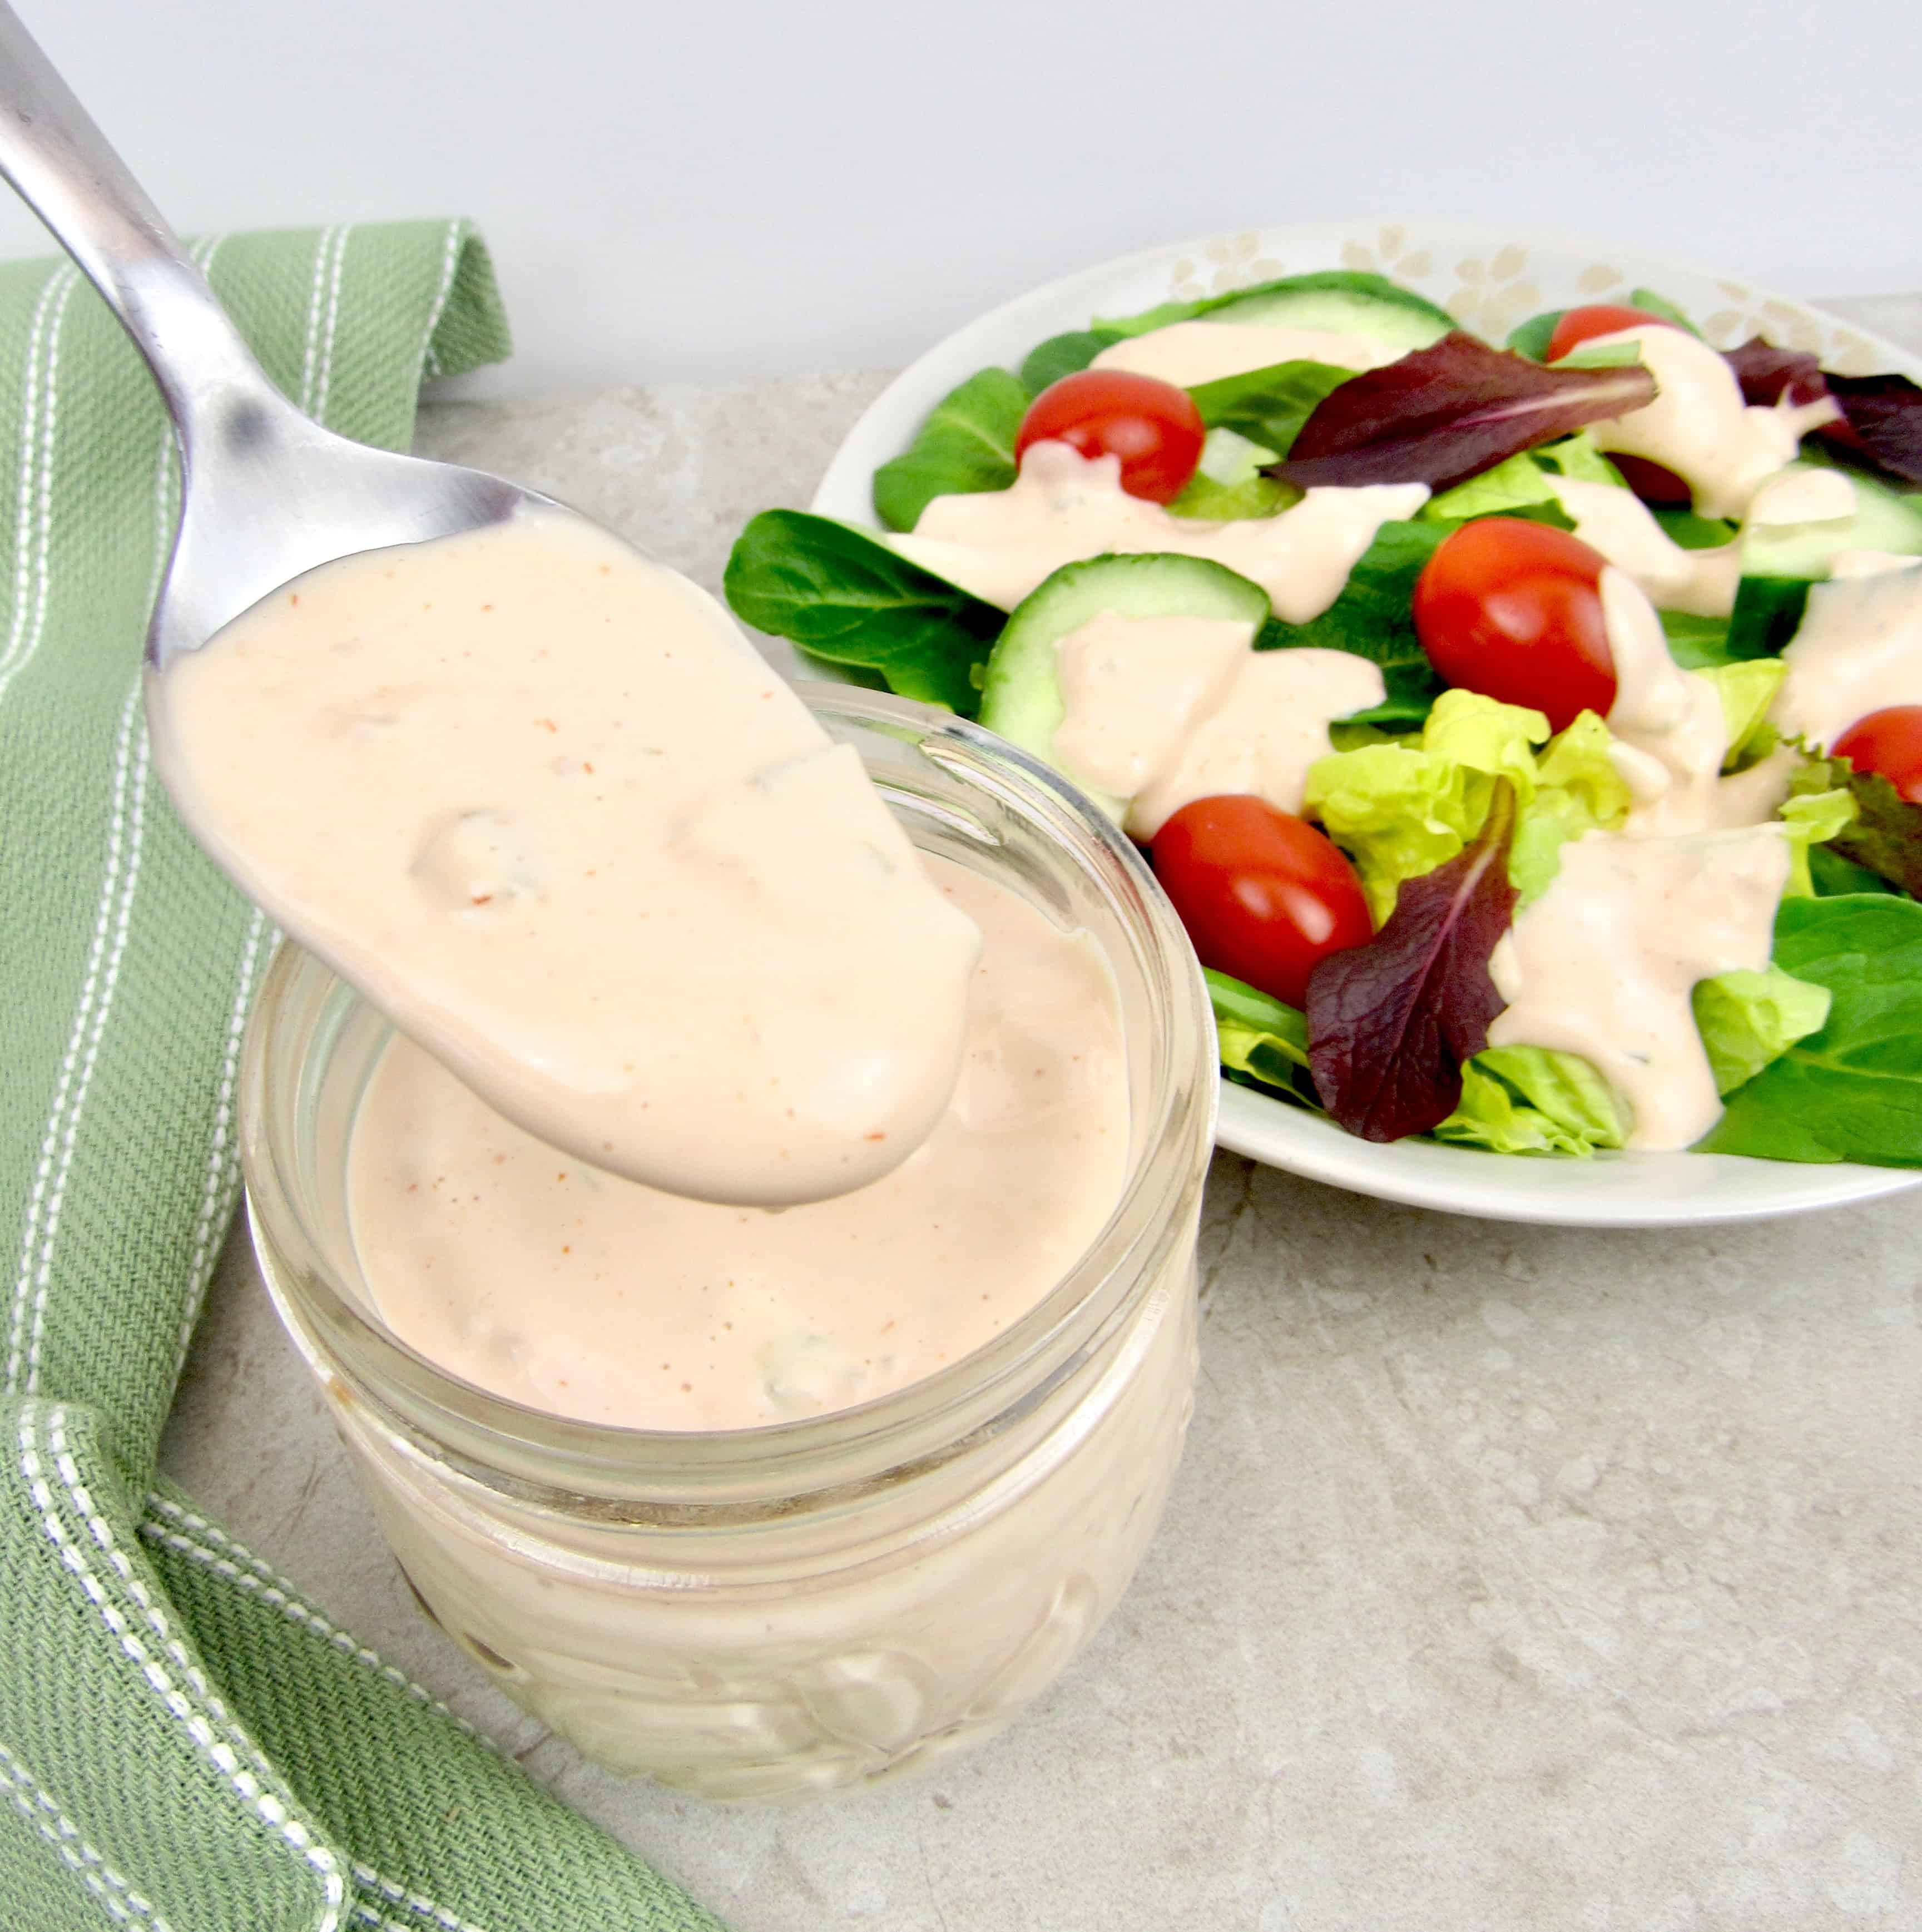 salad with thousand island dressing being pour on with a spoon